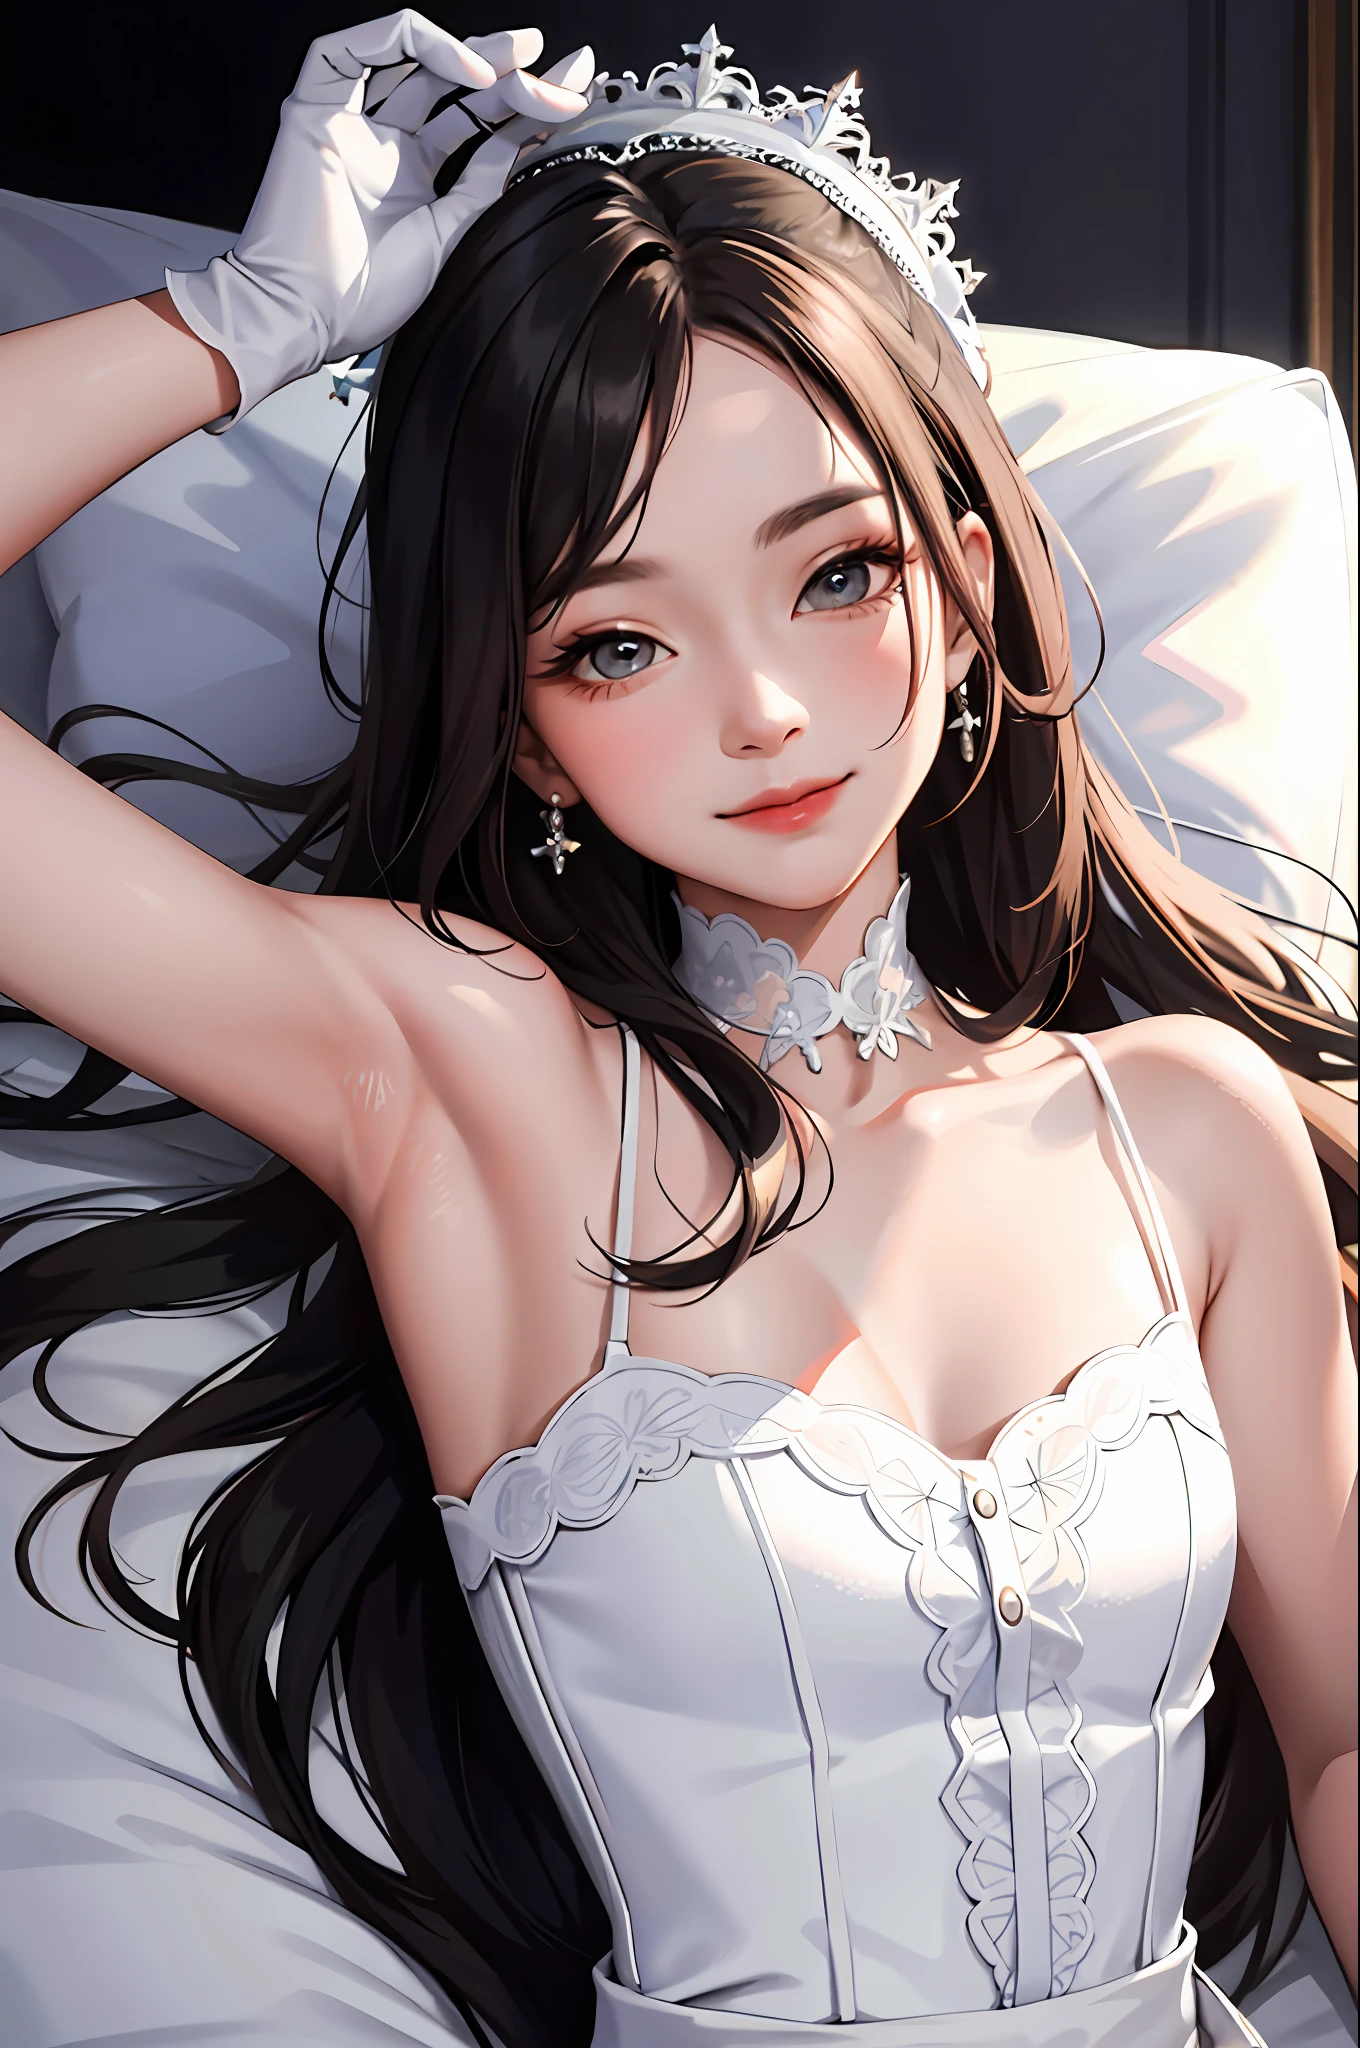 (Masterpiece: 1.2, highest quality), (real photo, fine detail), one woman, alone, short gloves and bodice, casual, long hair, simple makeup, natural fabric, close-up, smile, family, lying on bed and looking into camera)